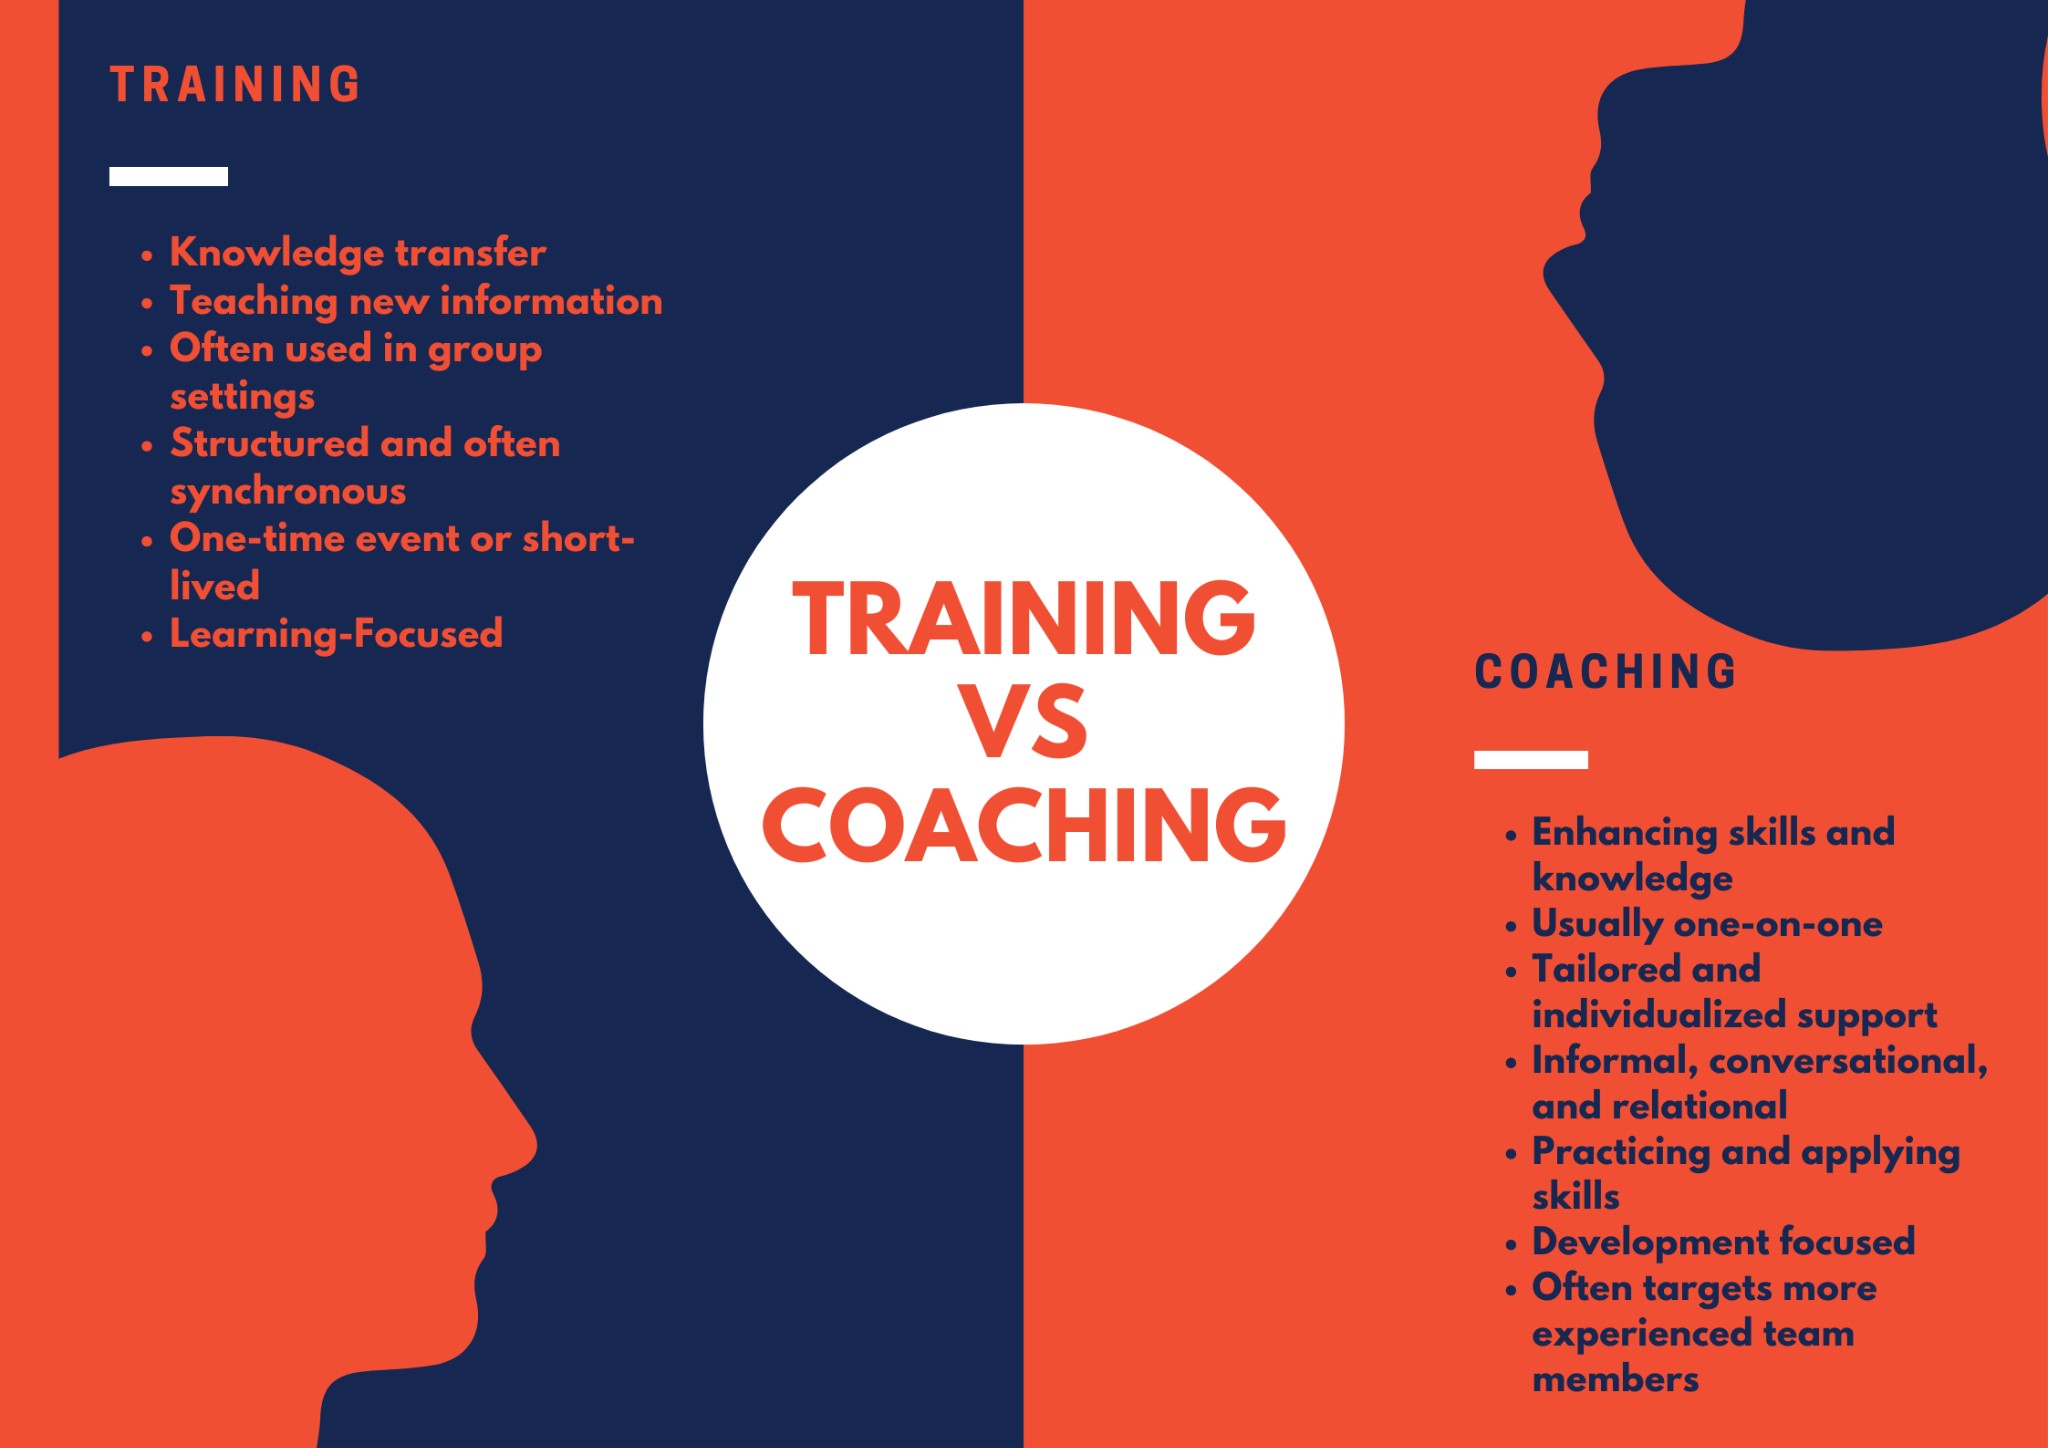 Traits of training and coaching